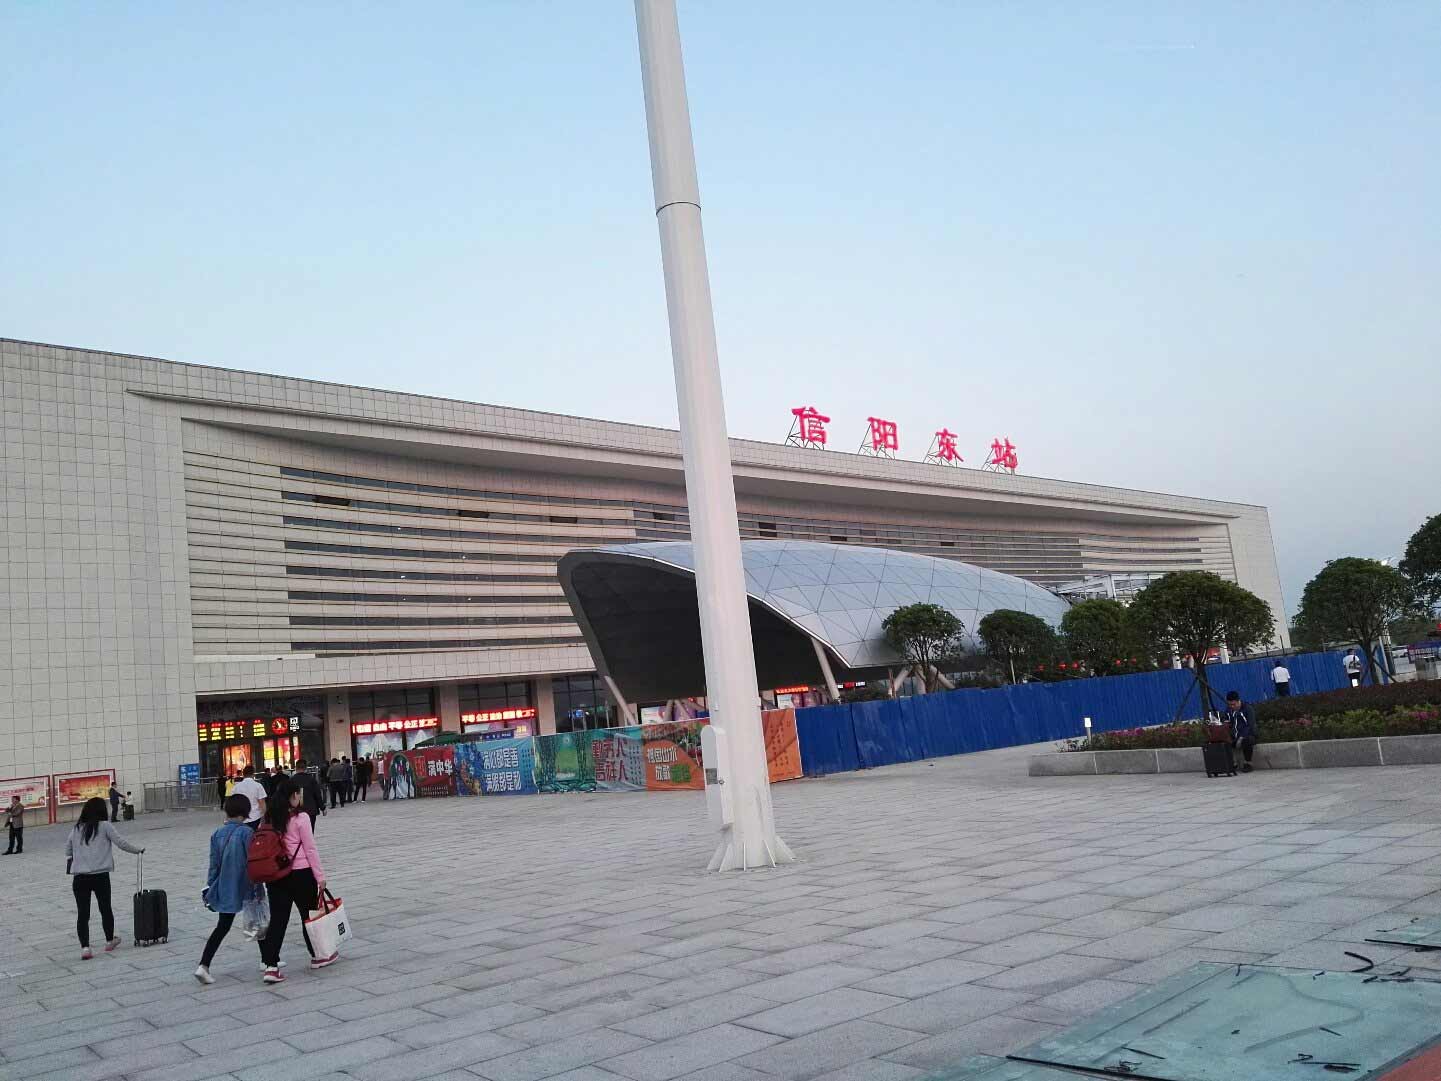 Xinyang East Station